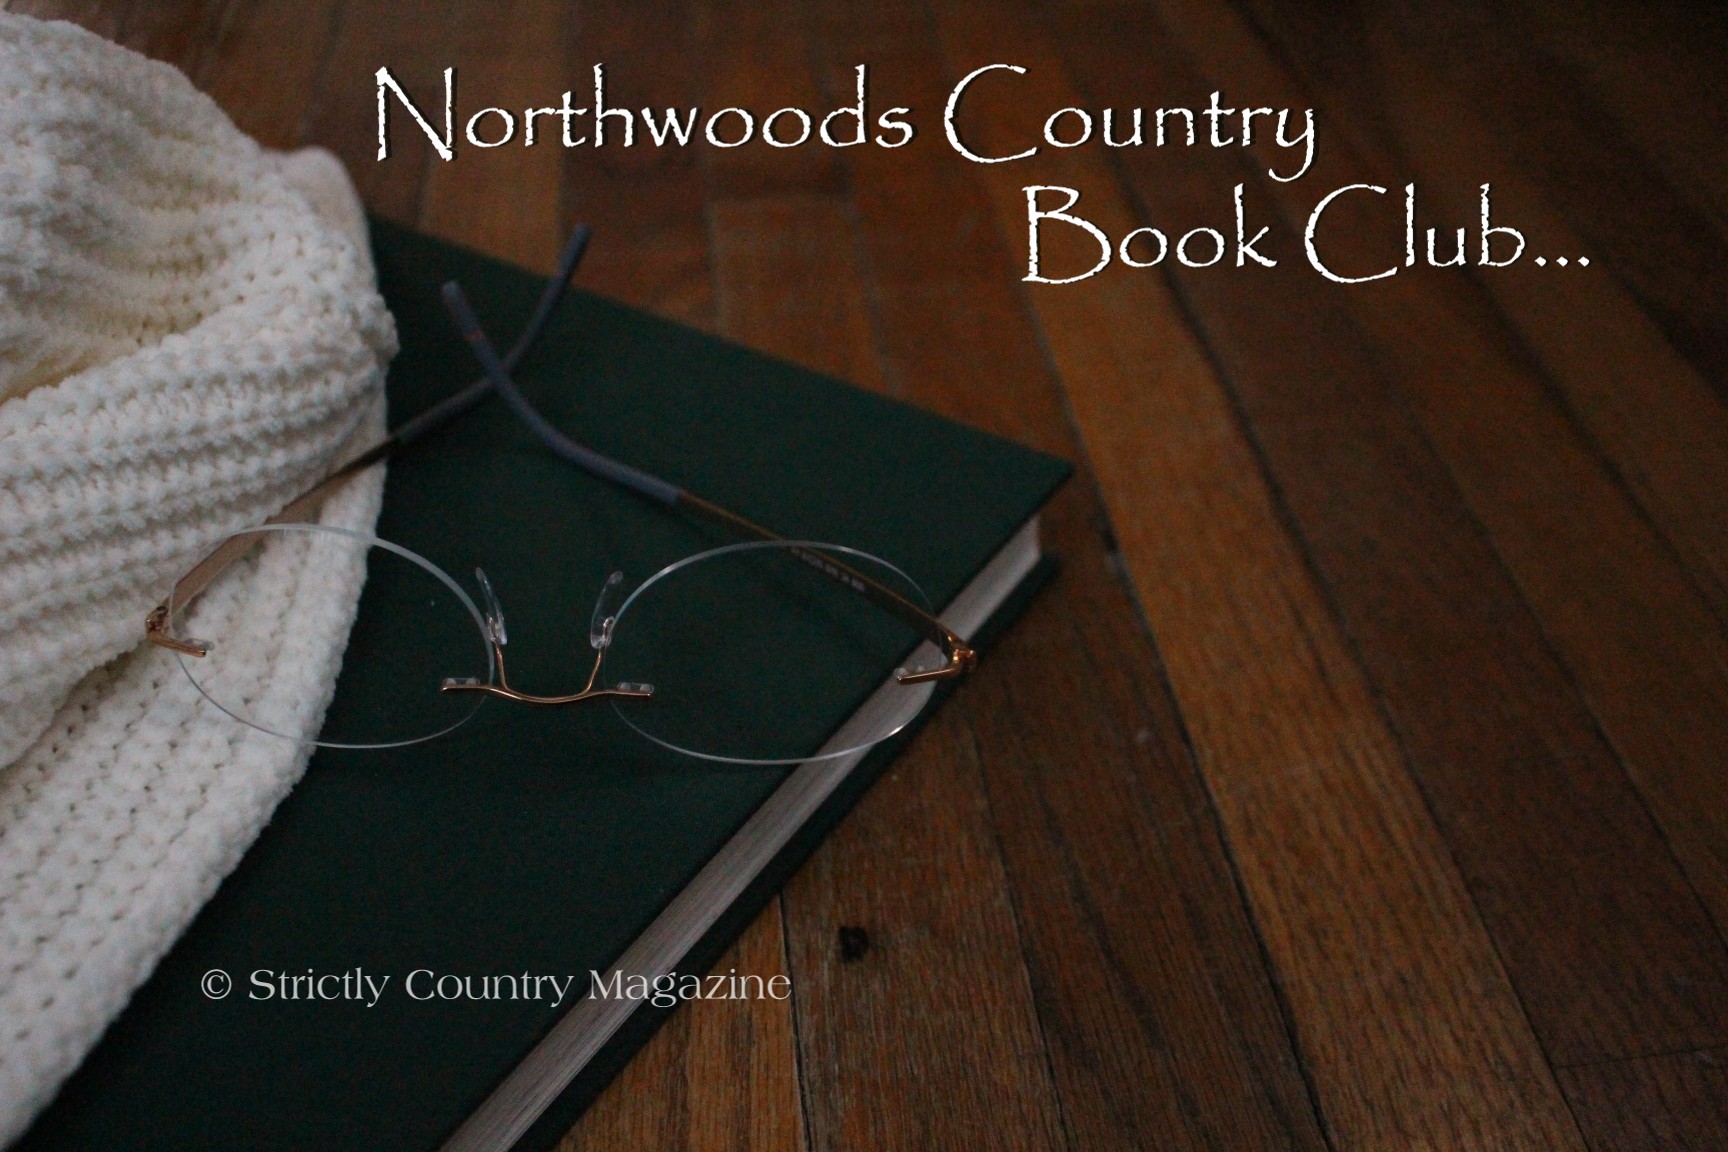 Strictly Country Magazine Northwoods Country copyright Book Club